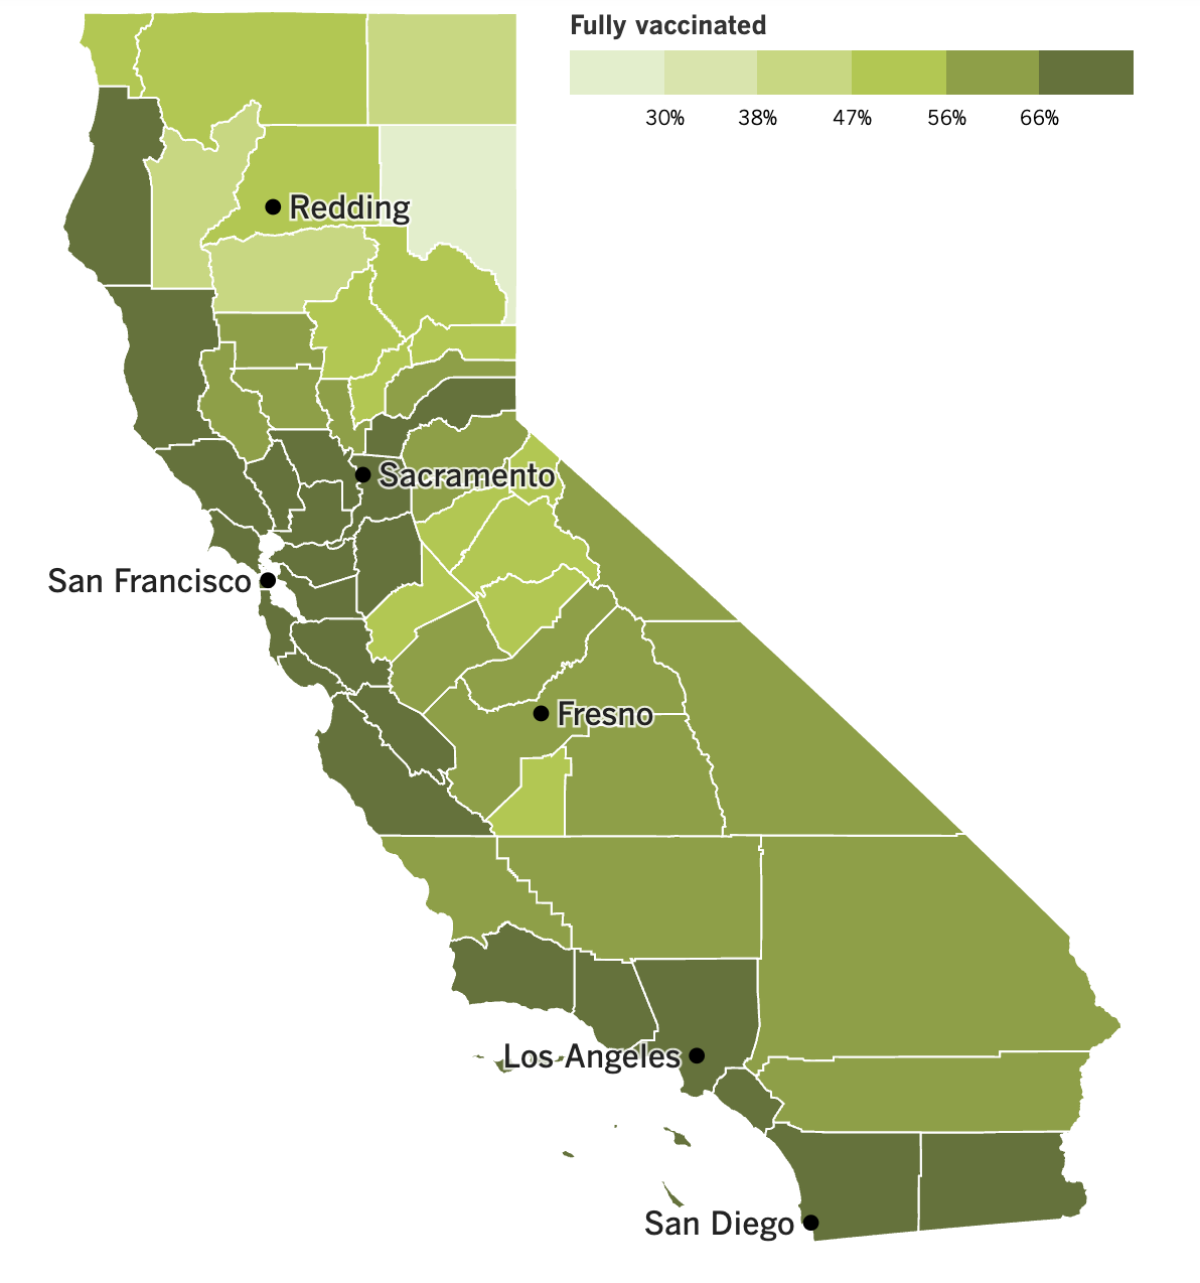 A map showing California's vaccination progress by county as of Jan. 17, 2023.